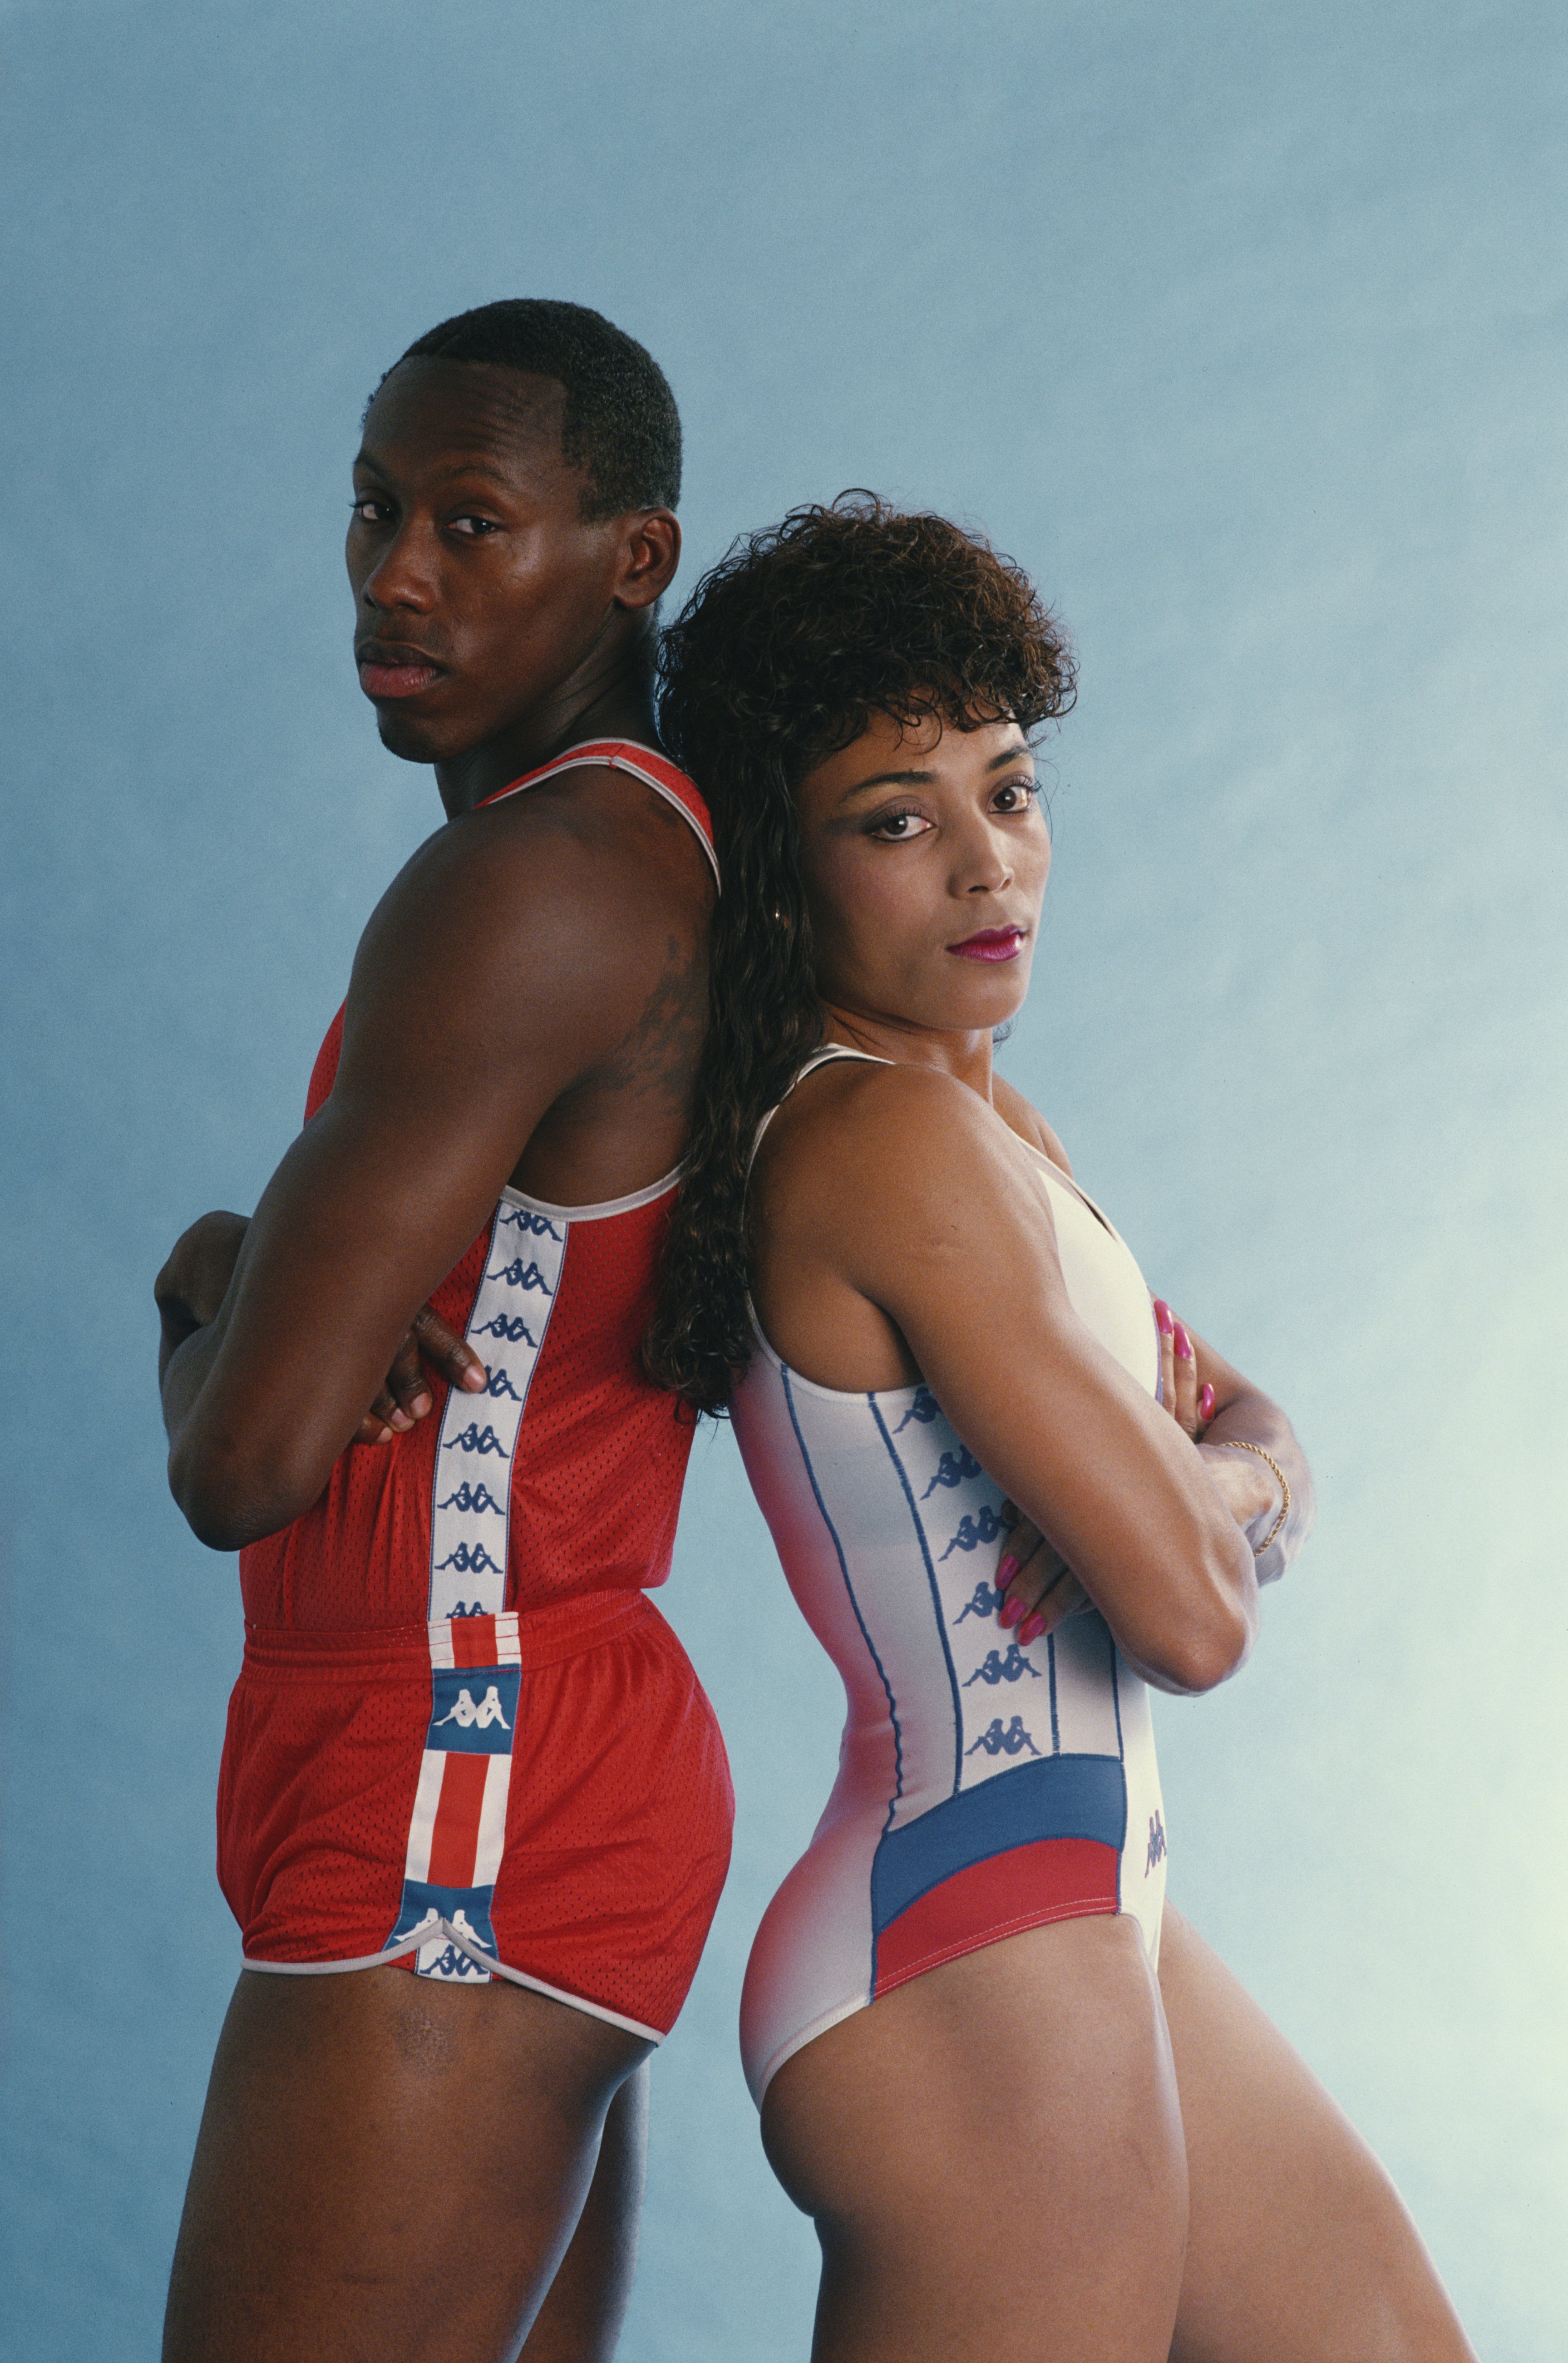 Florence Griffith Joyner and Al Joyner in Los Angeles, California, United States on 5 April 1988 | Source: Getty Images